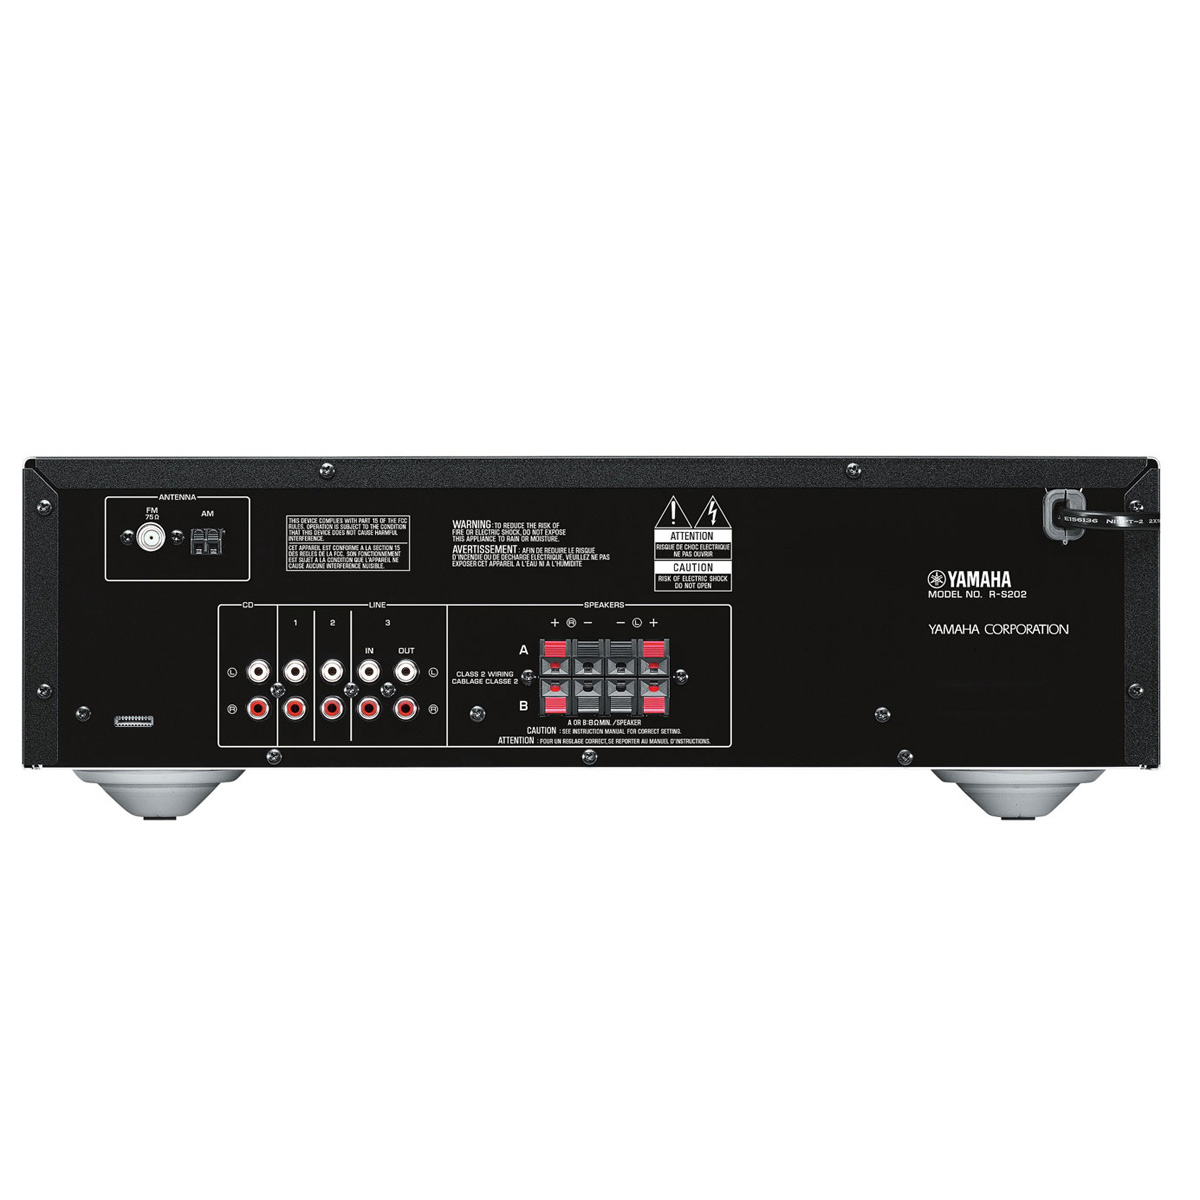 Yamaha Natural Sound Stereo Receiver, Black - image 2 of 3